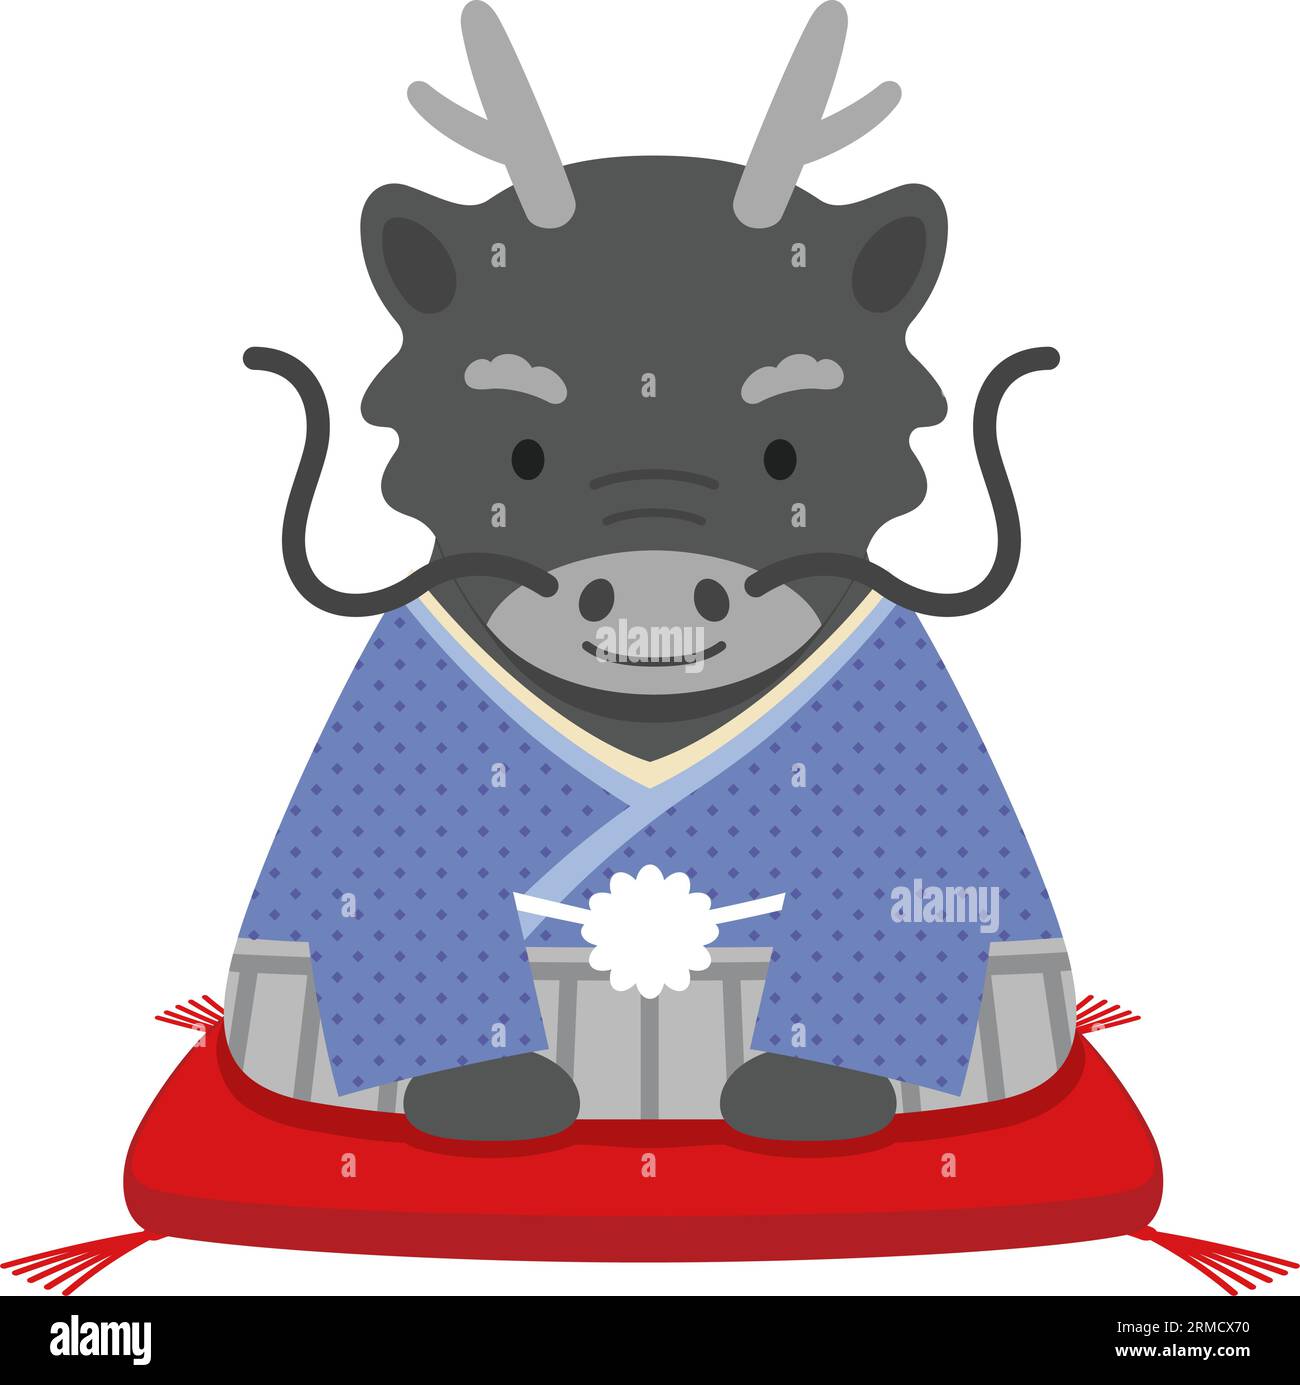 The Year Of The Dragon Mascot Dressed In Japanese Kimono Offering His/Her New Year Greetings. Vector Illustration Isolated On A White Background. Stock Vector